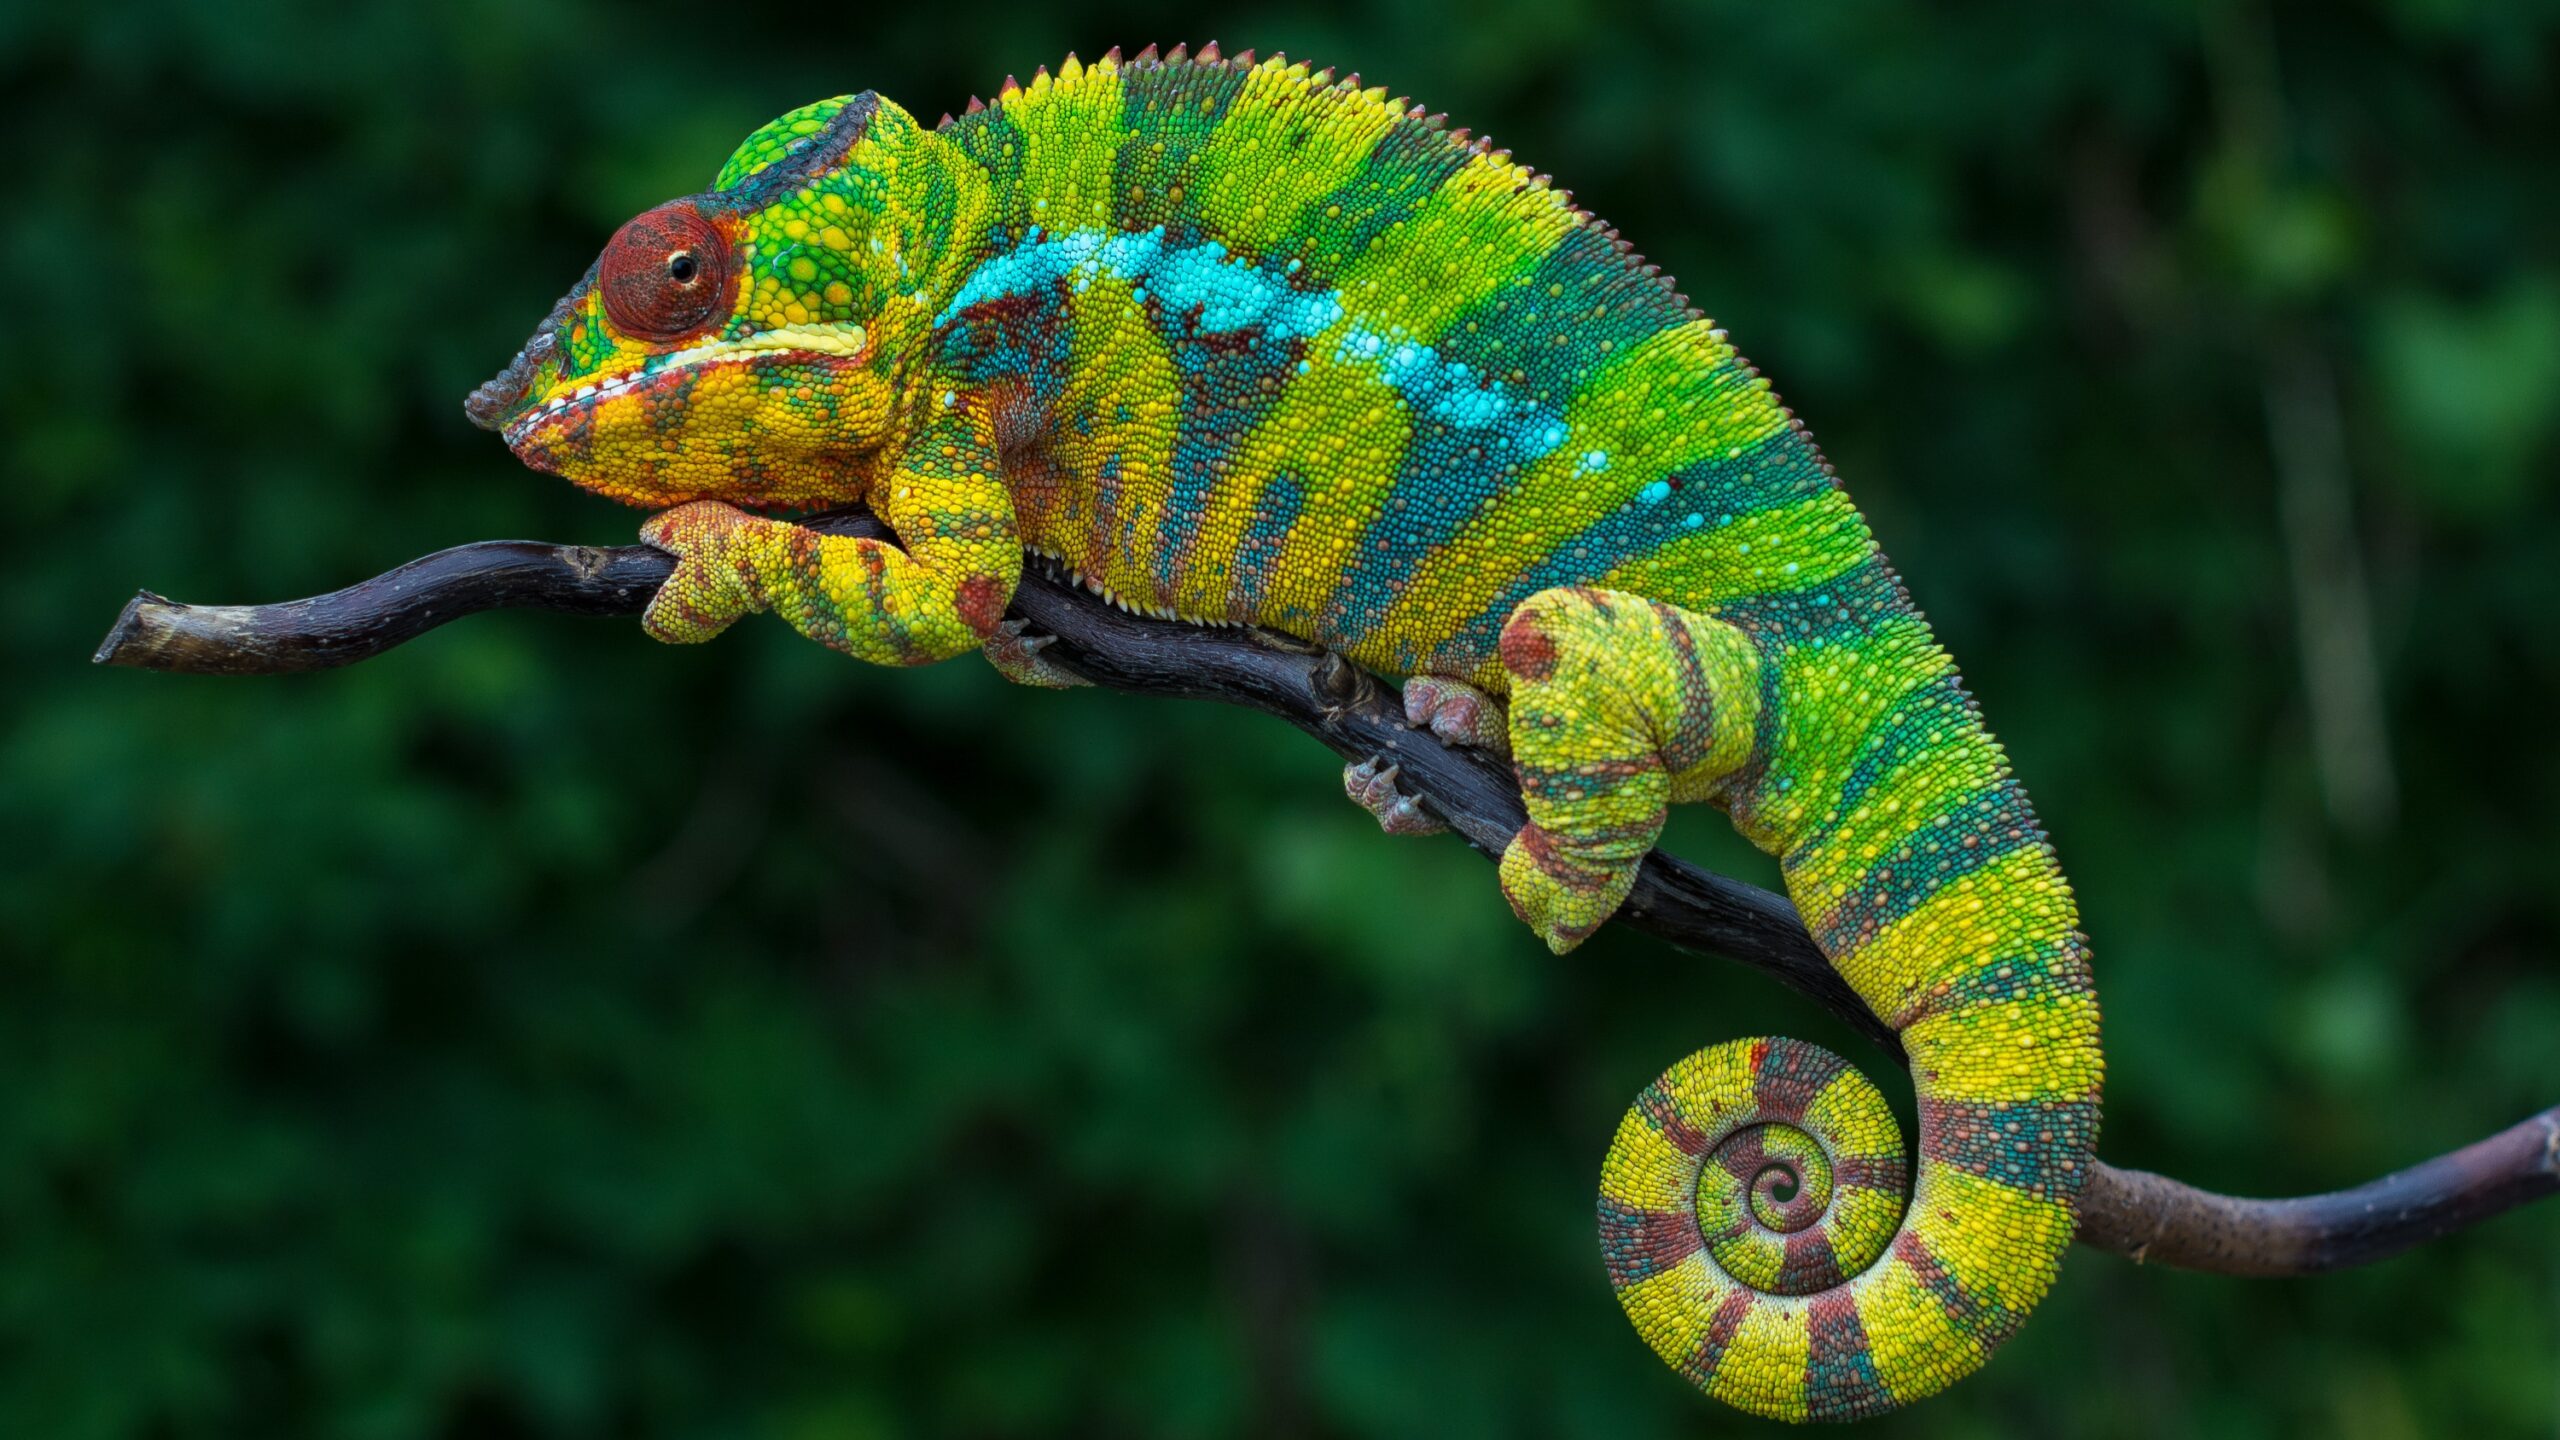 Chameleons and bacterial infections